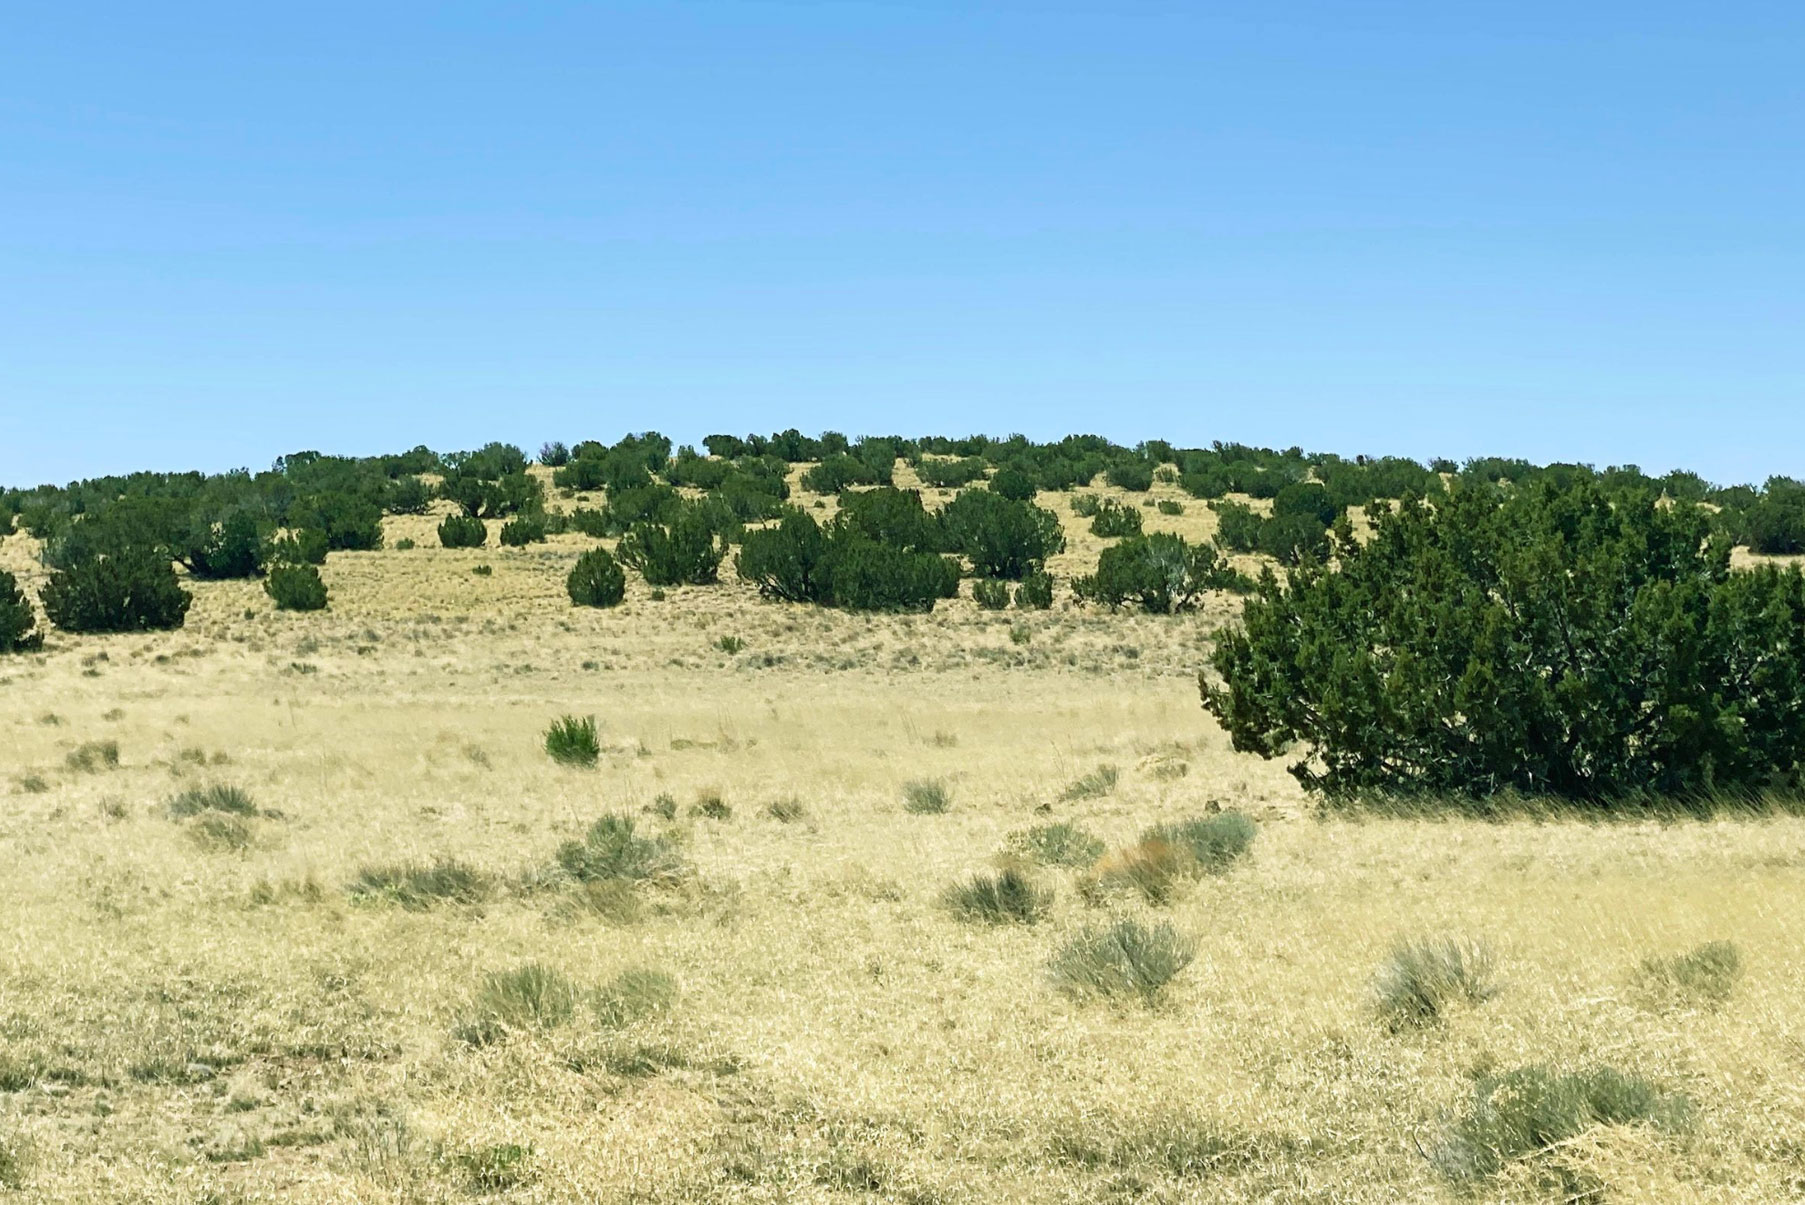 http://Ultimate%20Seclusion%2037%20Acre%20Northern%20AZ%20Ranch